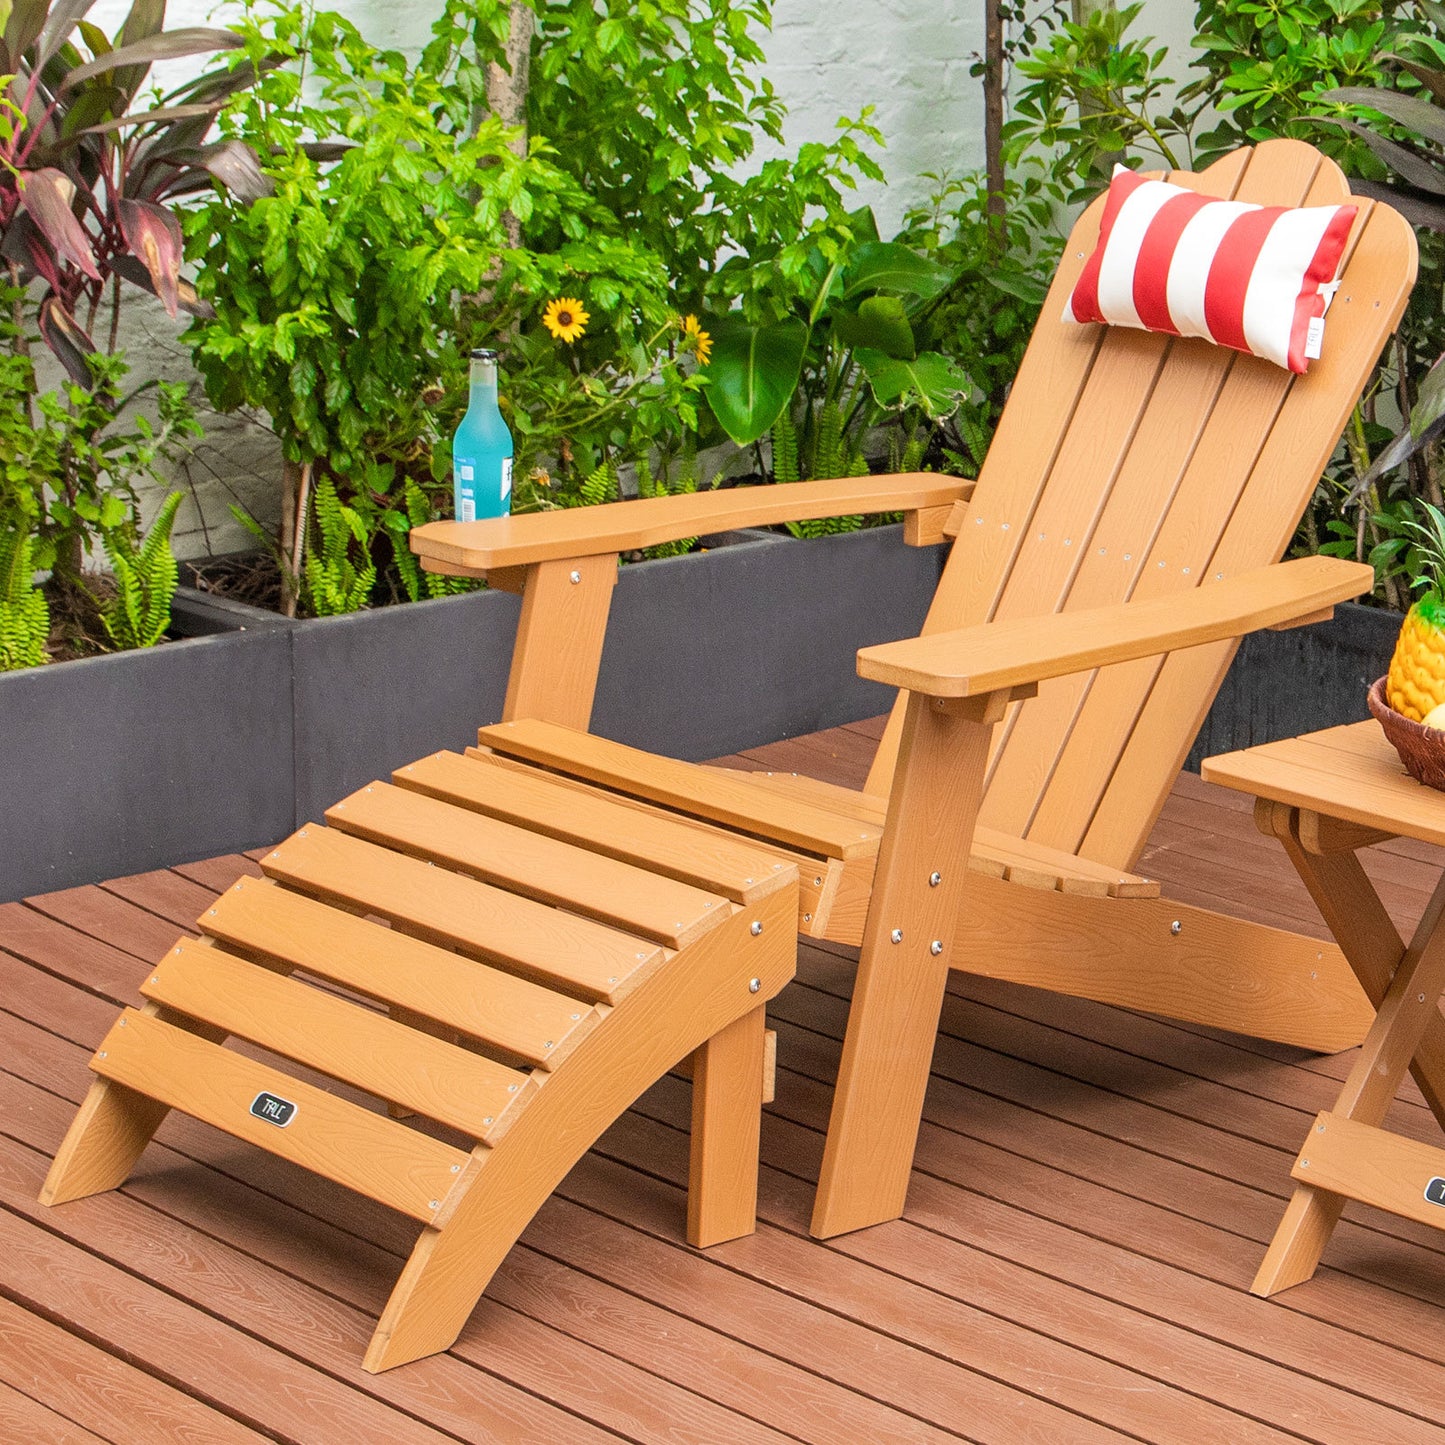 Fade-Resistant Plastic Wood for Lawn Outdoor